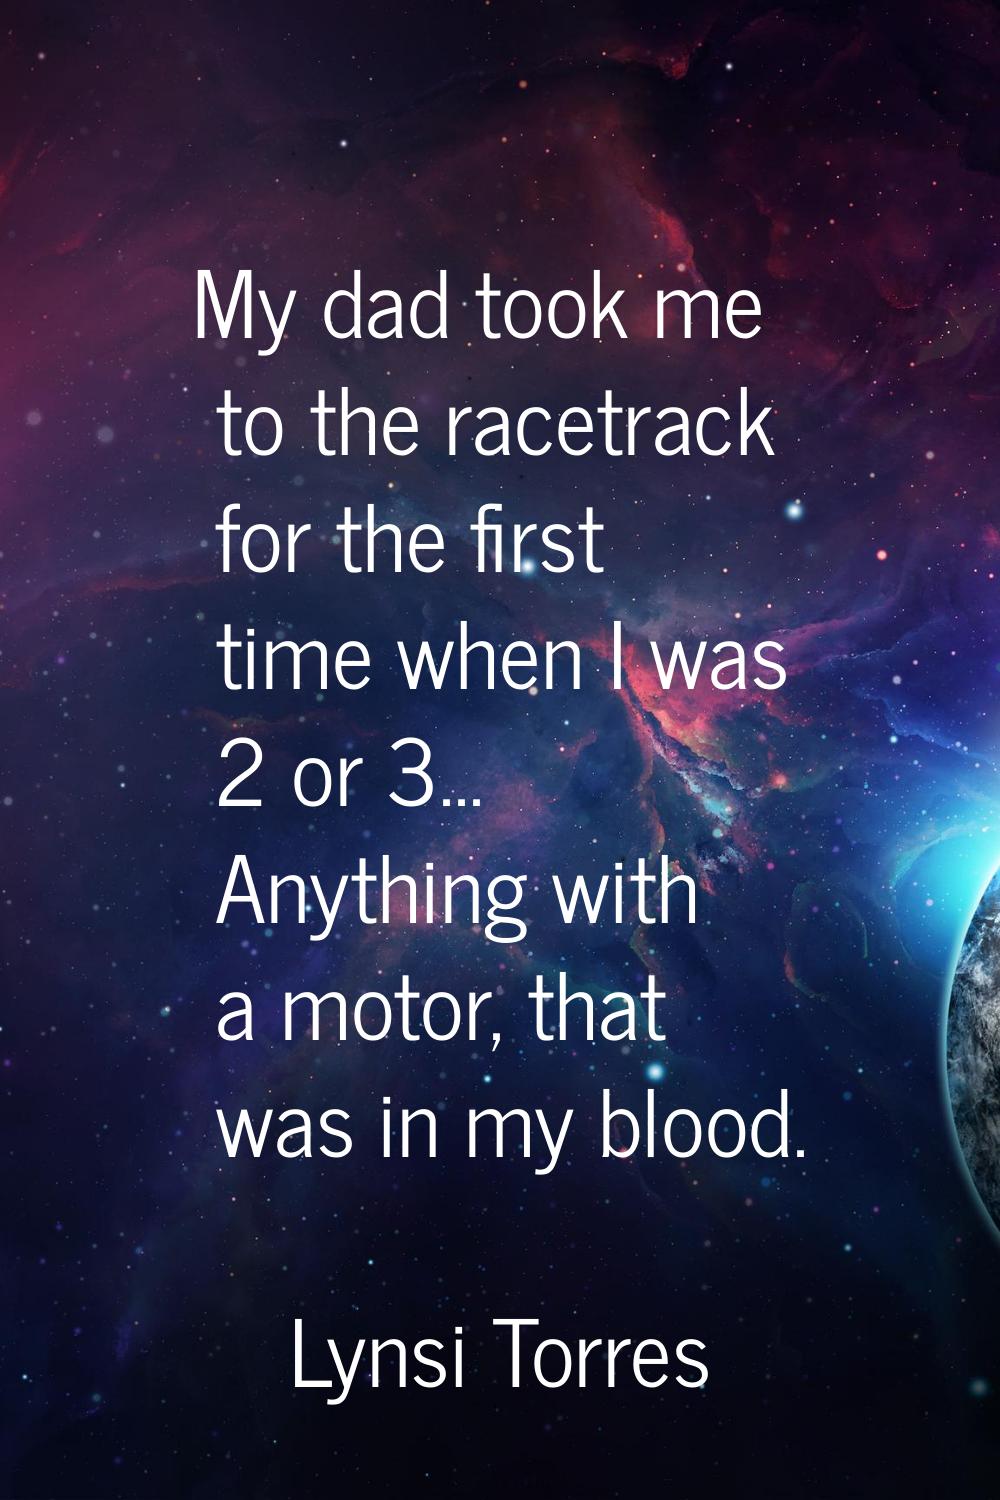 My dad took me to the racetrack for the first time when I was 2 or 3... Anything with a motor, that